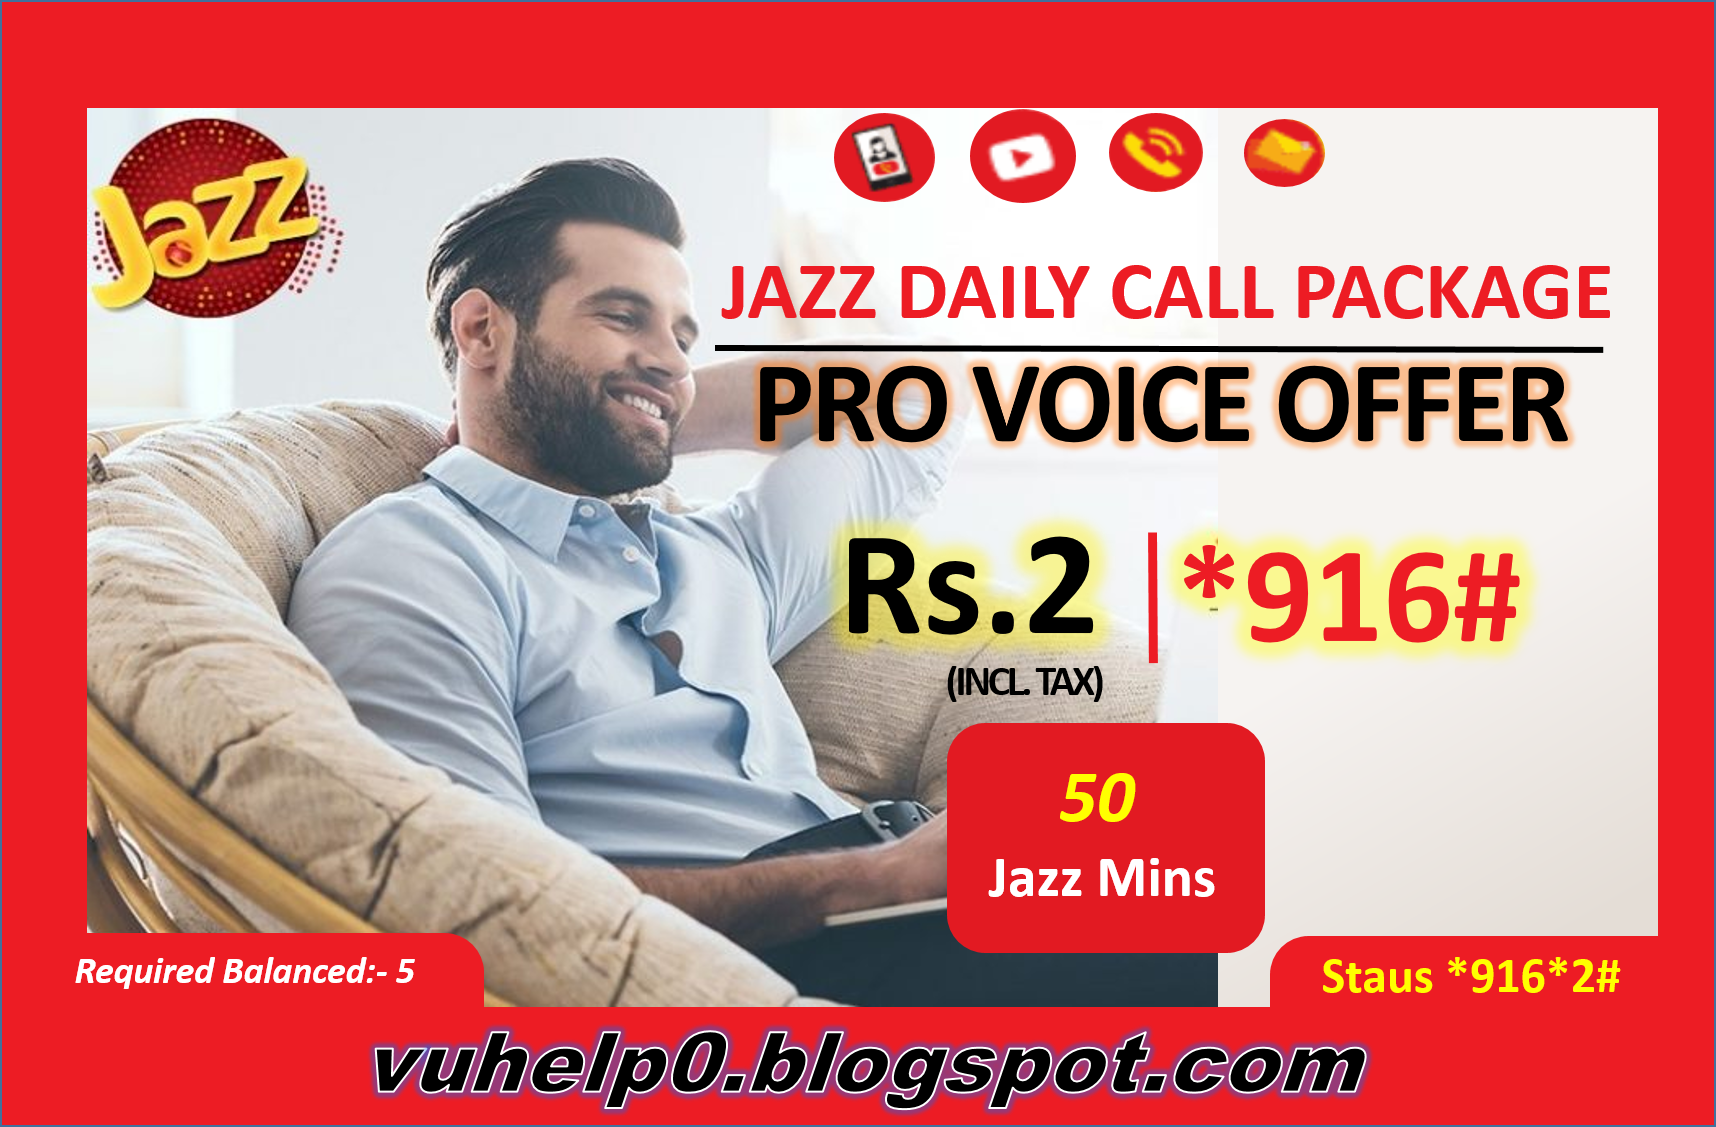 Jazz Daily Call Package & Pro Voice Offer | Jazz *916# Offer